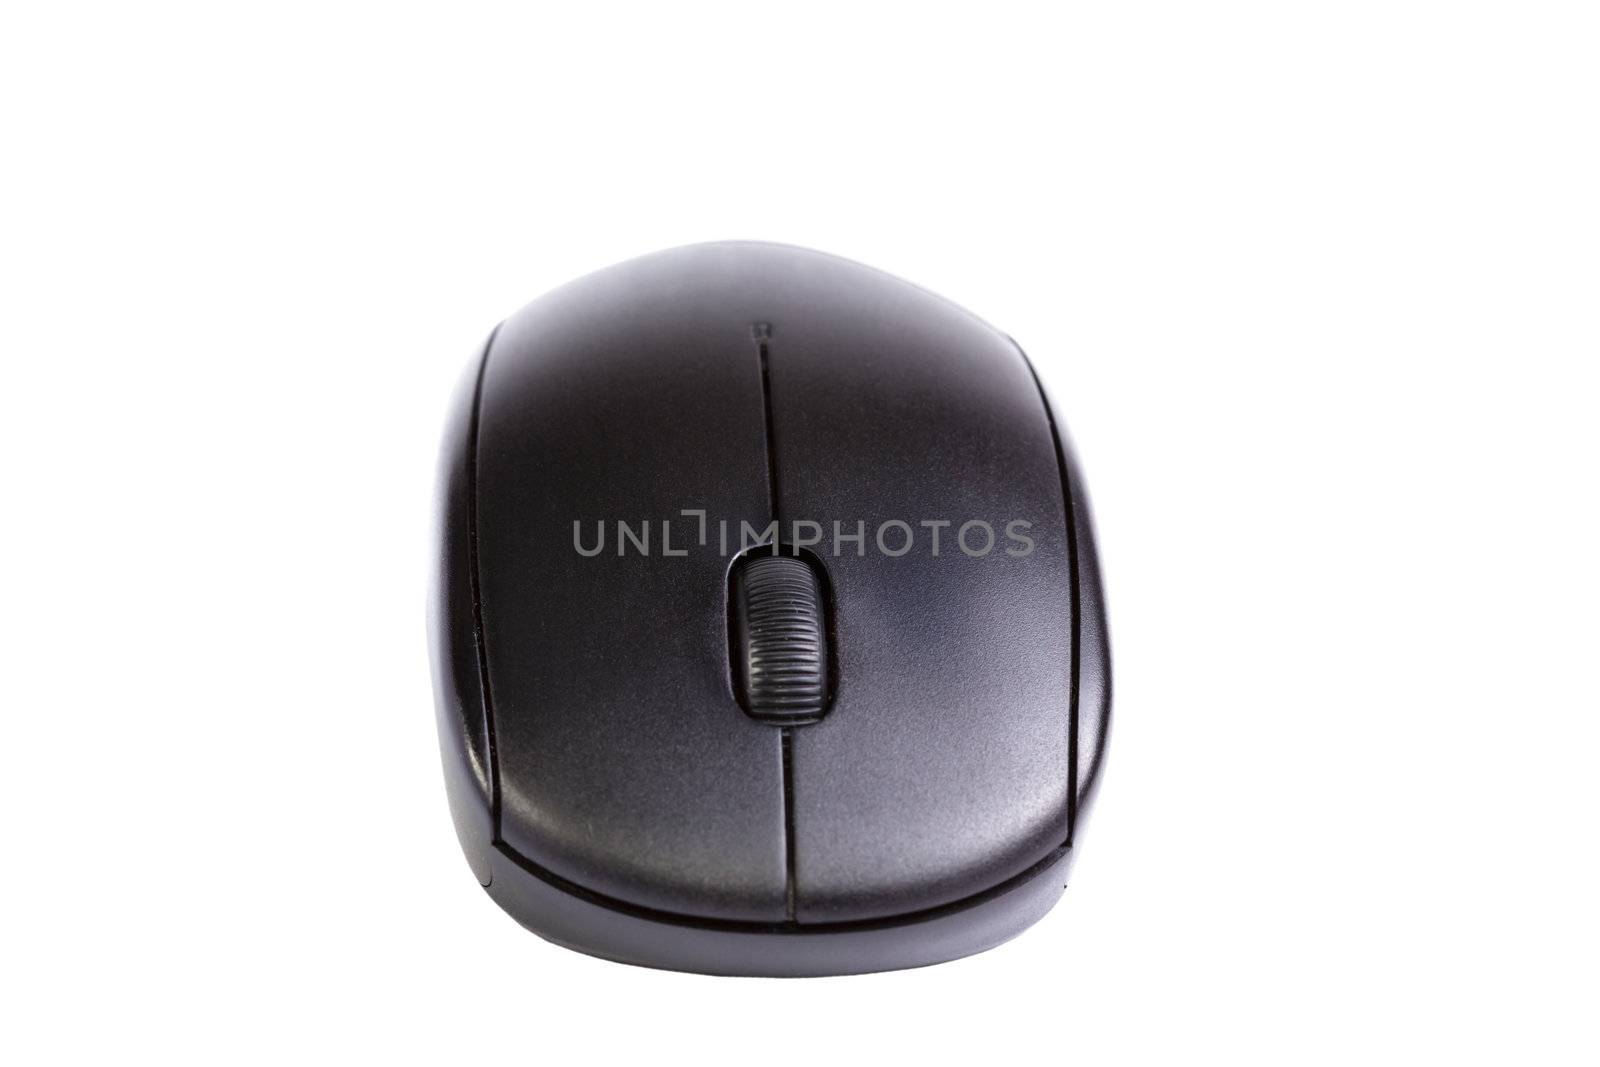 Black Wireless Computer Mouse by Roka